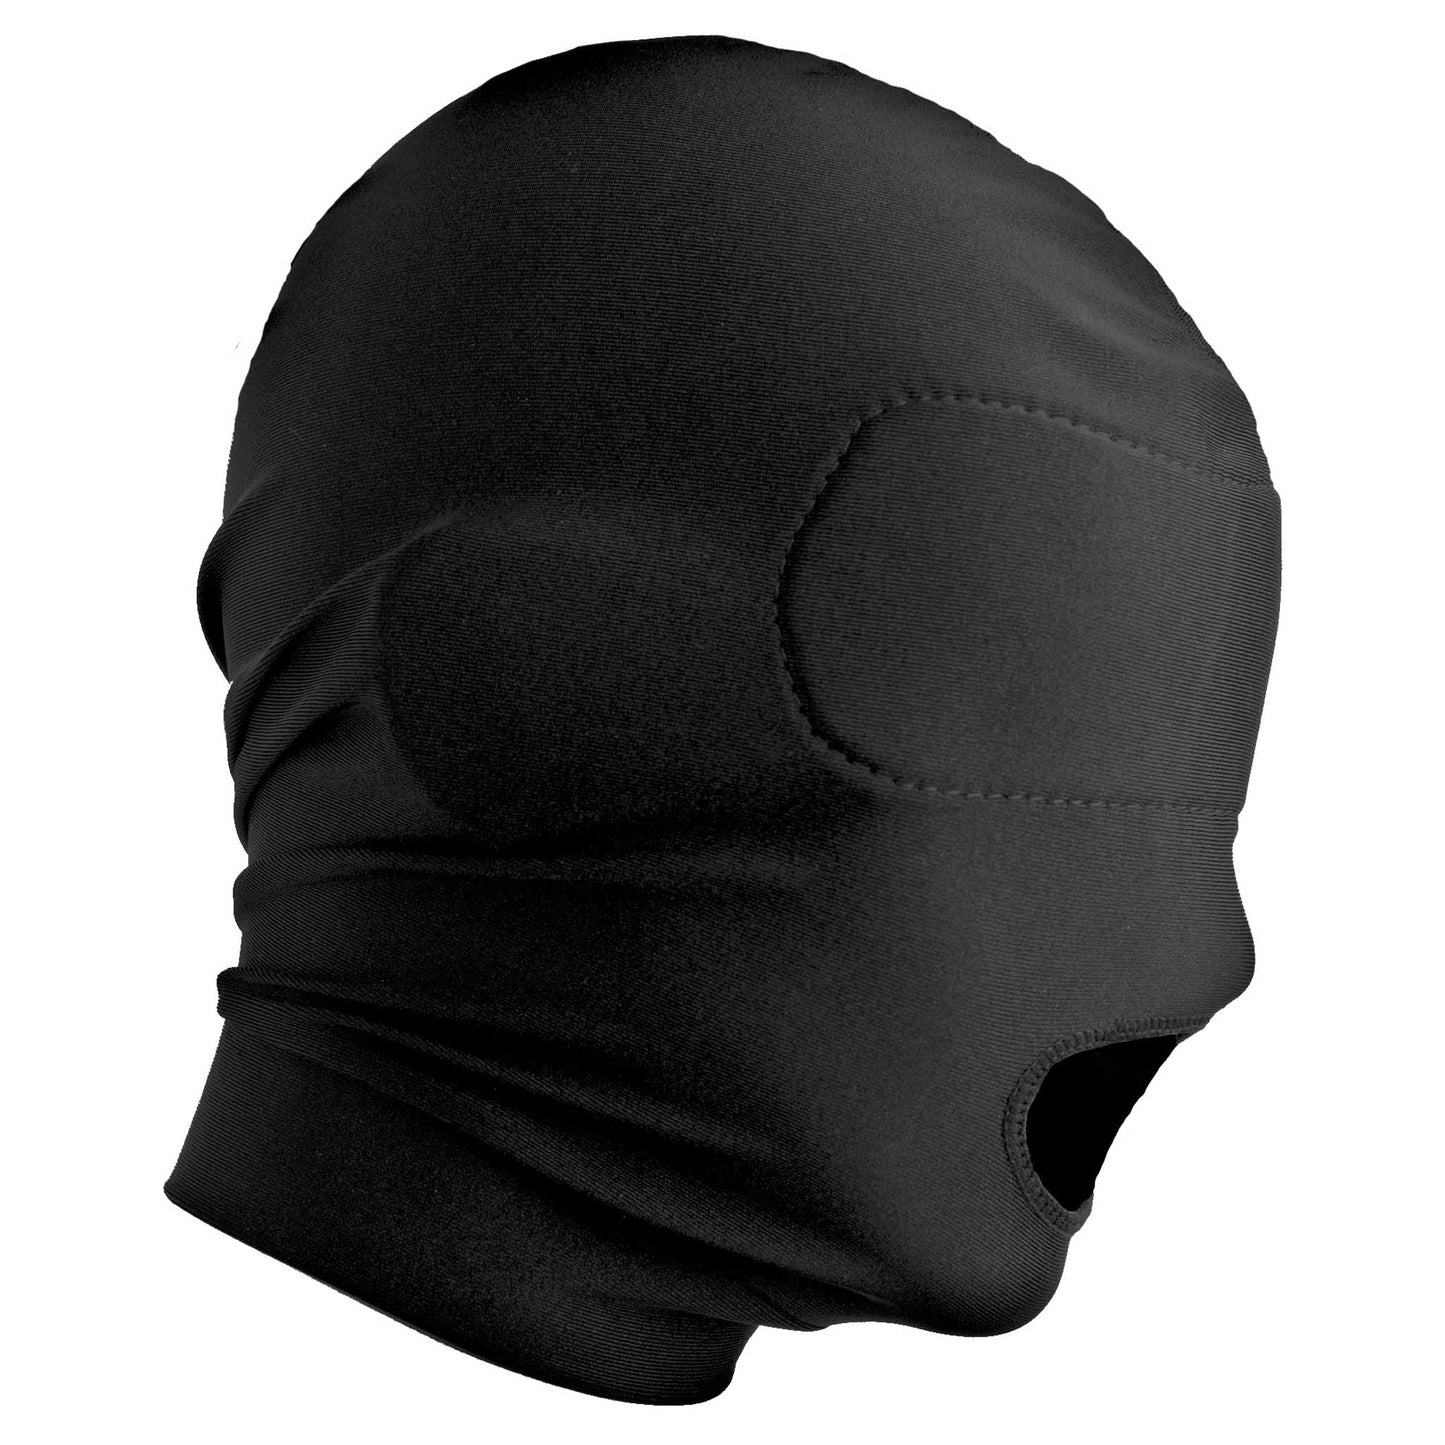 Master Series Disguise Open Mouth Hood with Padded Blindfold - Black